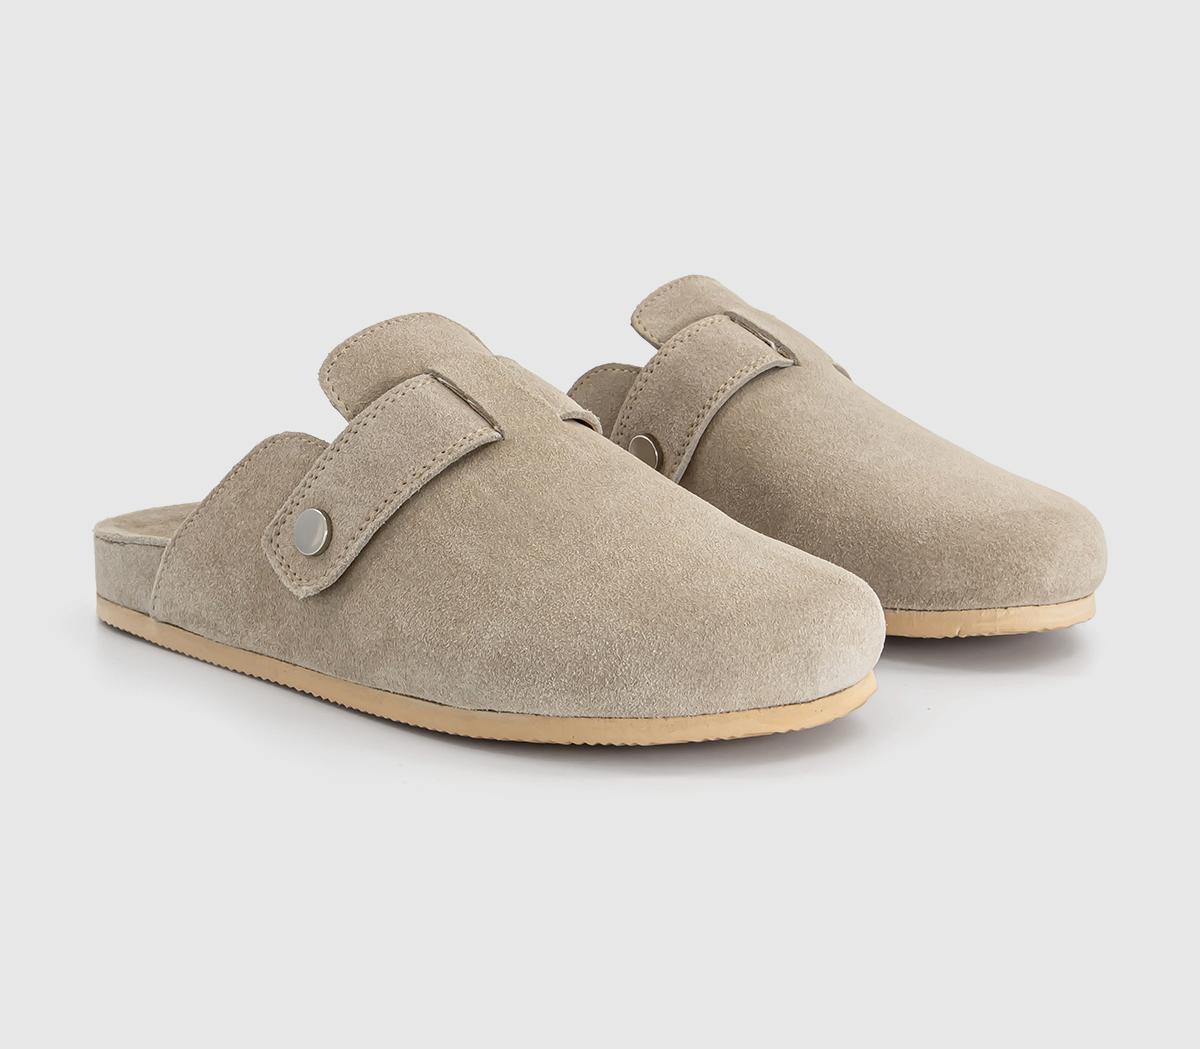 OFFICE Womens Star Buckle Detail Slip On Clogs Taupe Suede Grey, 5